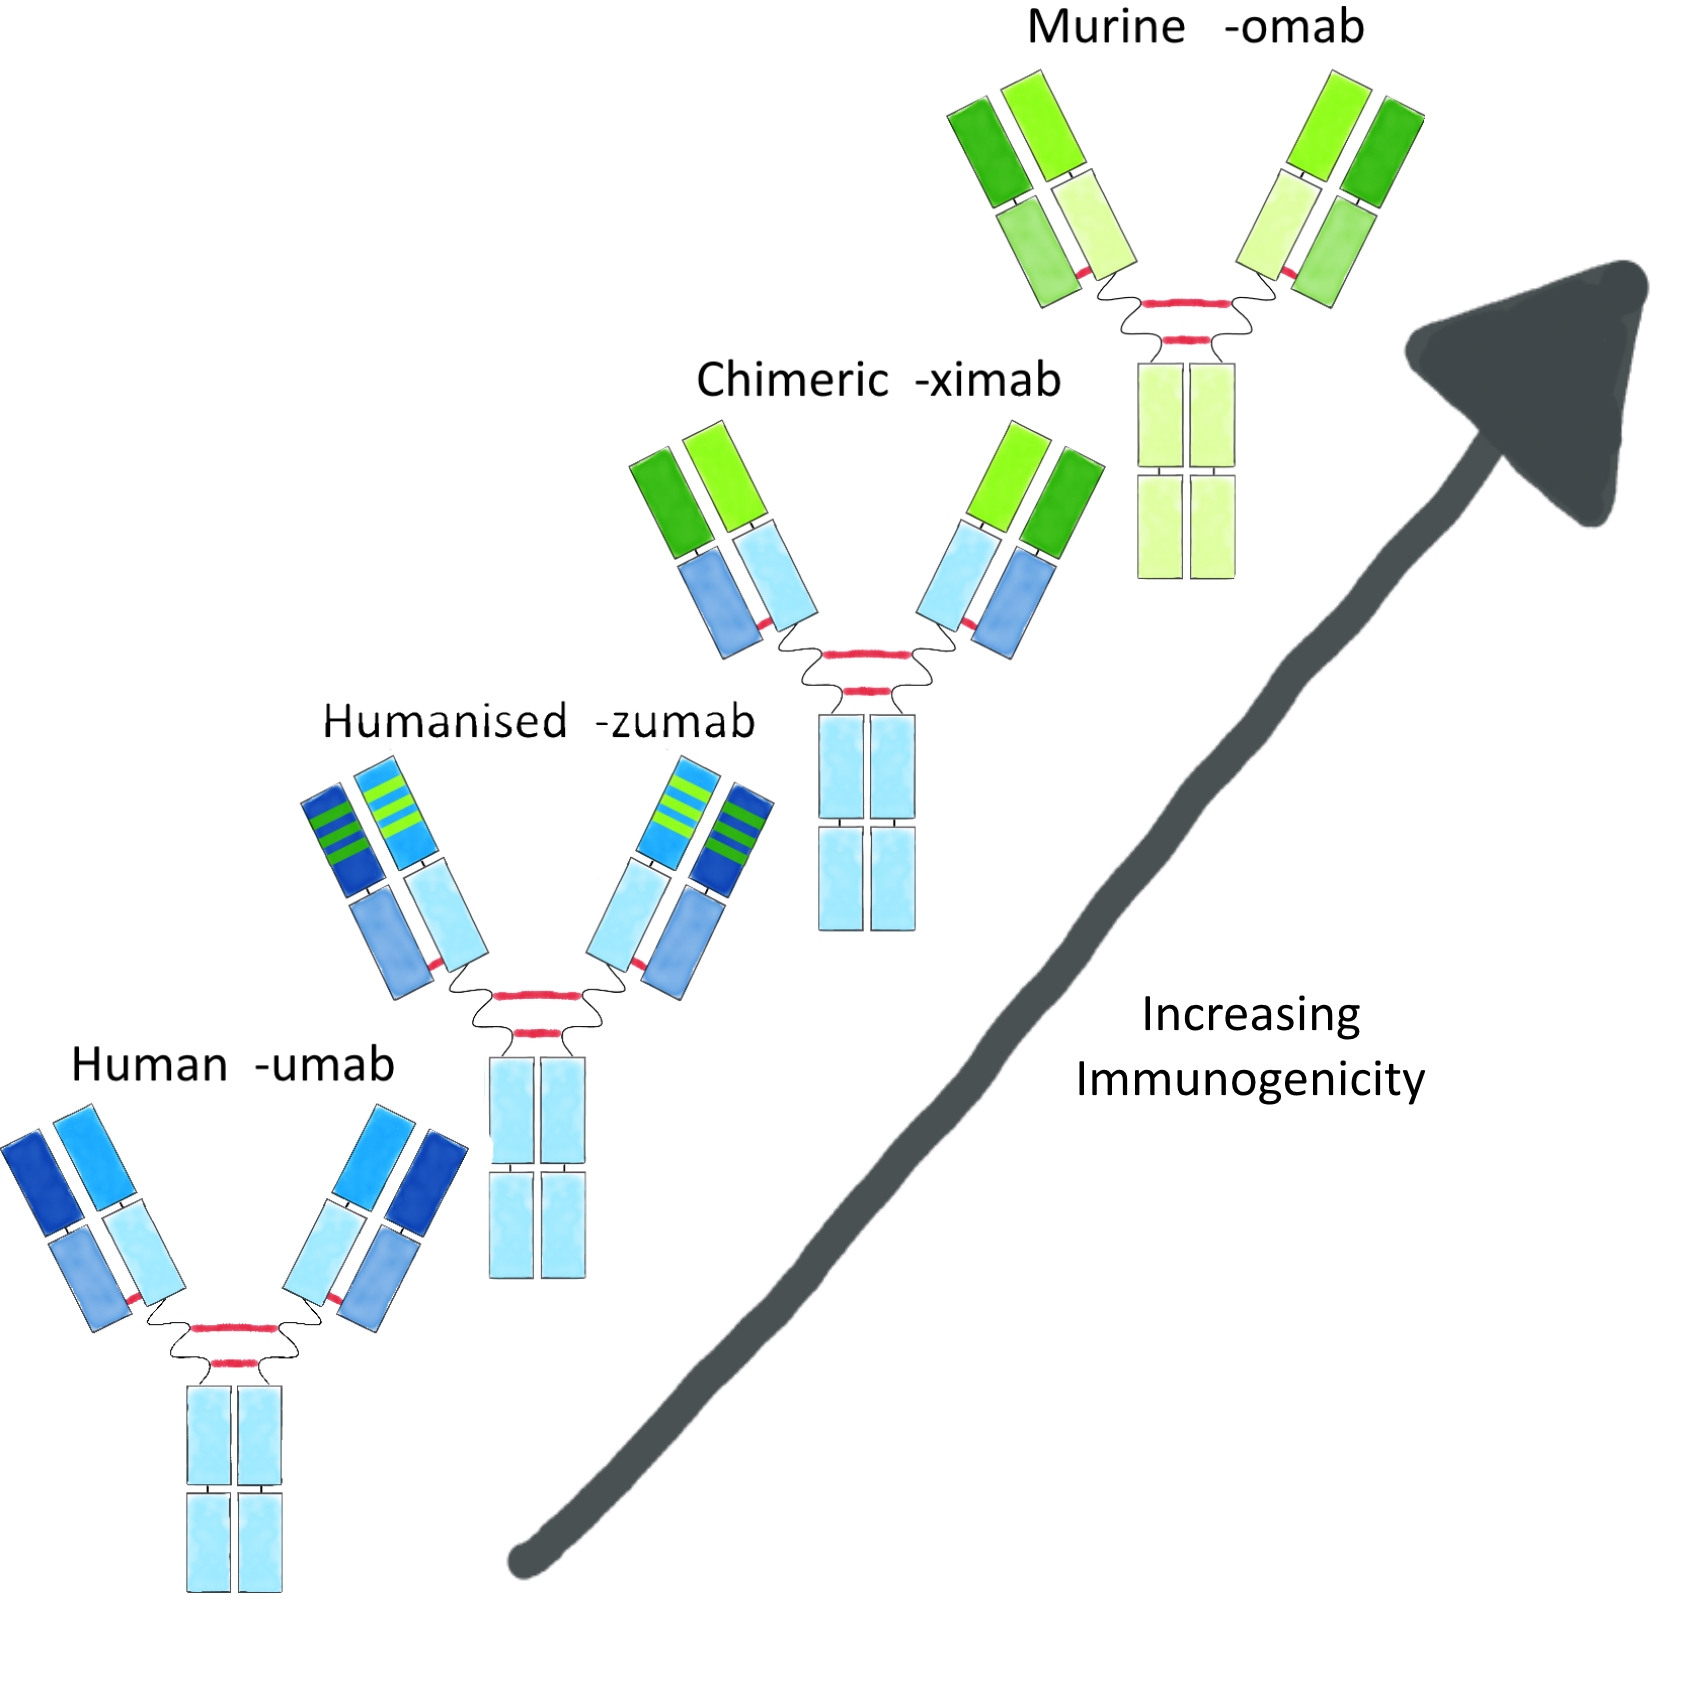 Ascending from left to right, increasing murine sequence content in a mAb, from fully human to fully murine